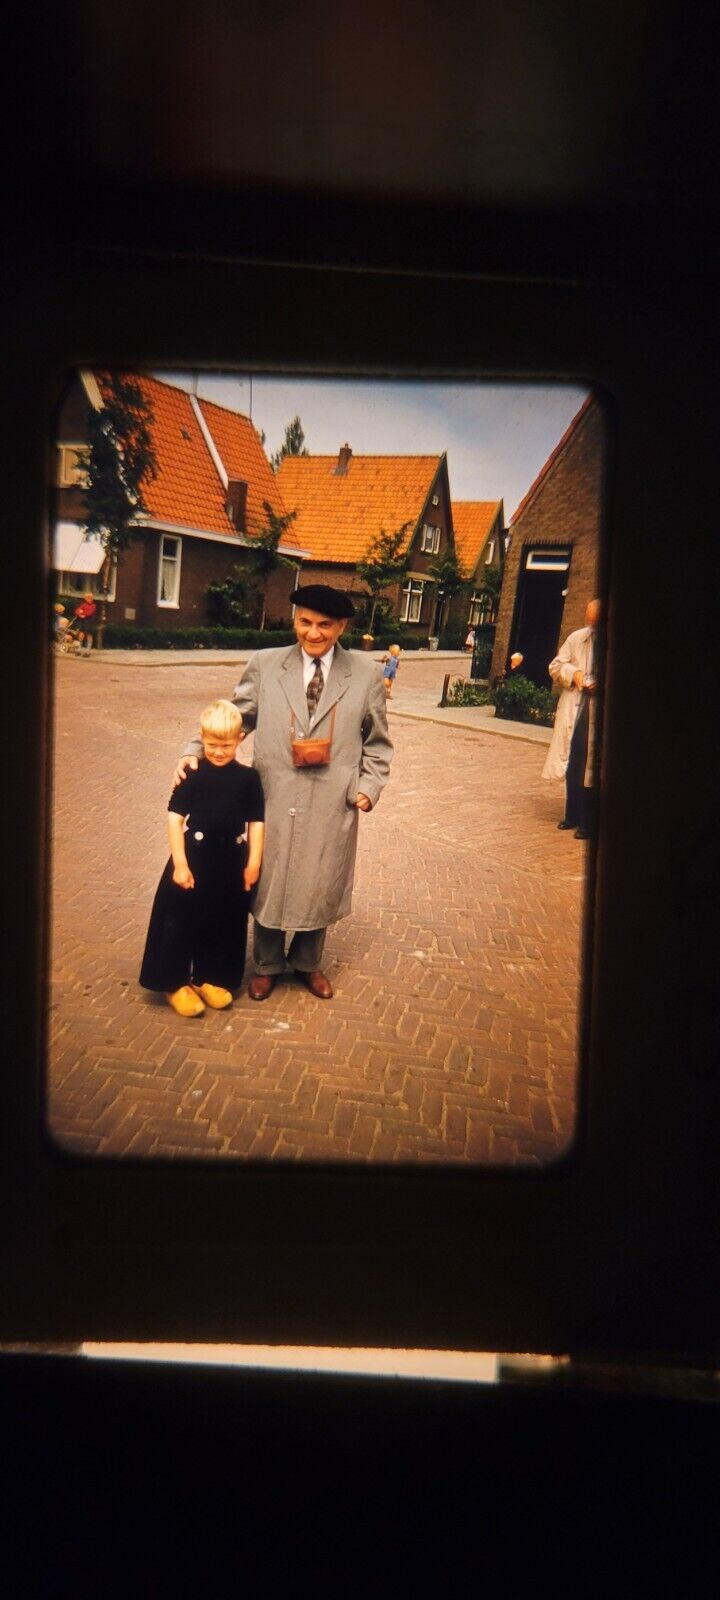 KU09 35MM SLIDE Americana photo Photograph BOY IN WOODEN SHOES POSES WITH MAN